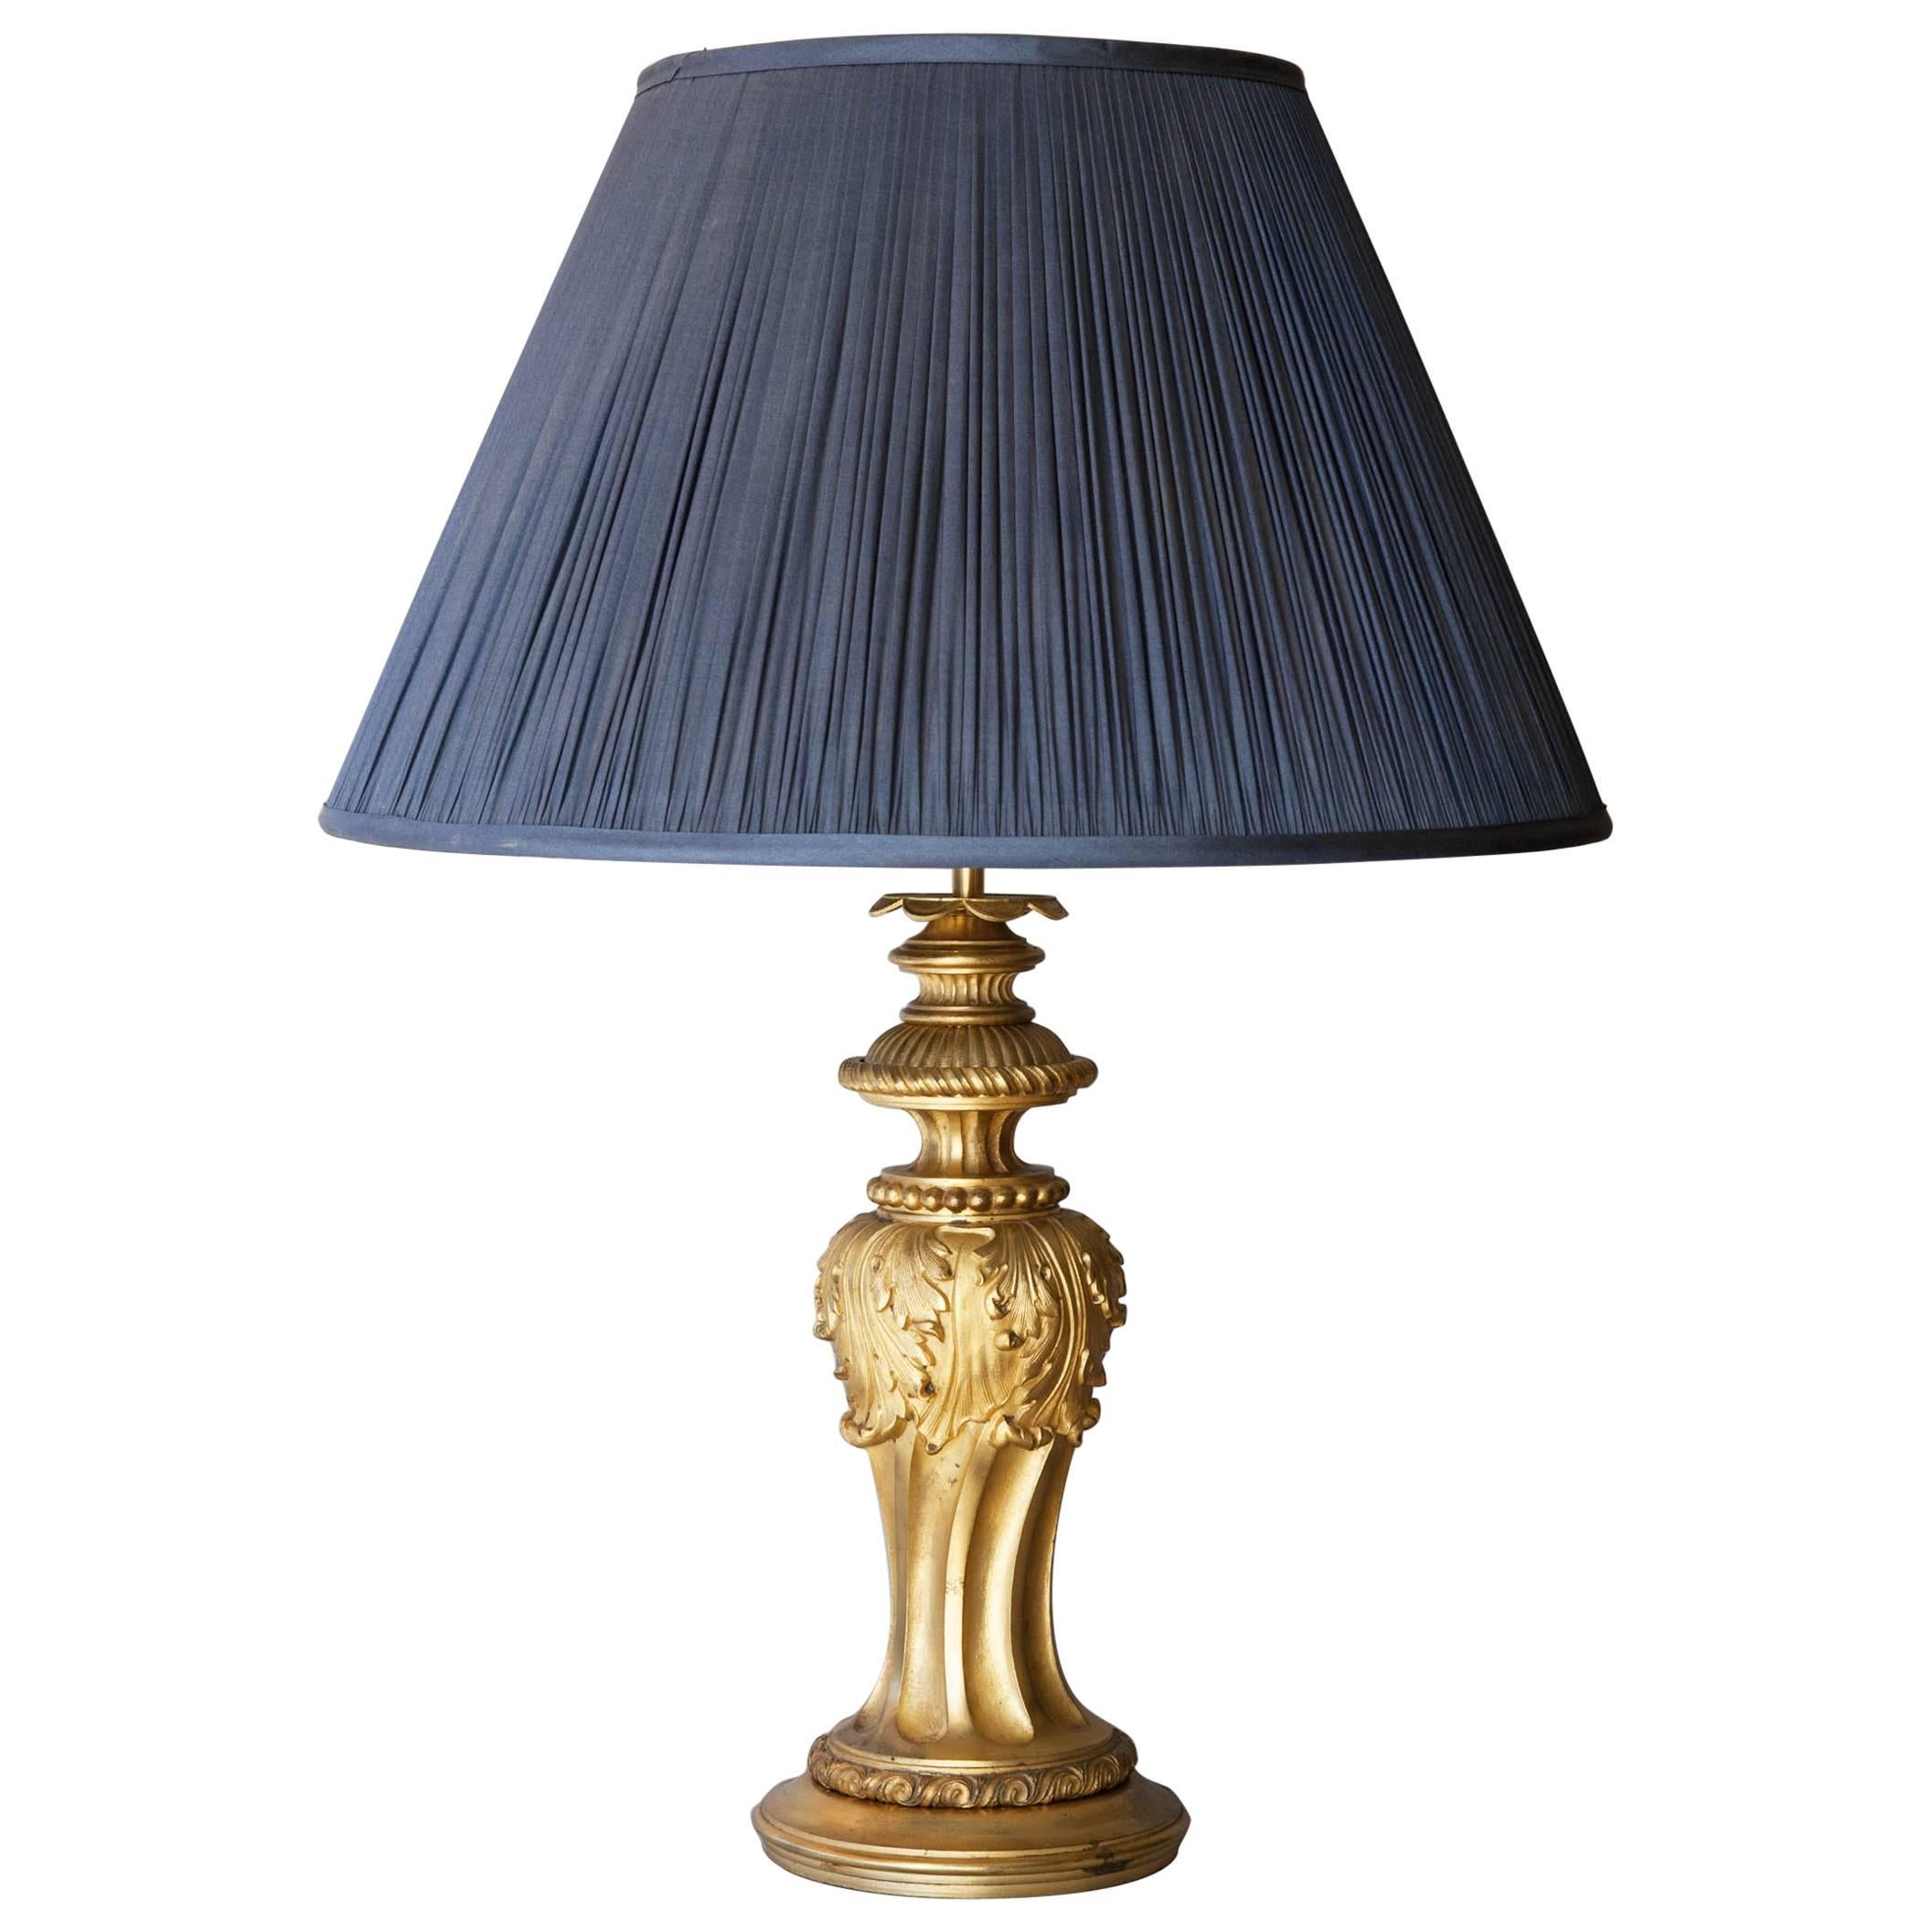 Late 19th Century Decorative Gilt Baluster Table Lamp